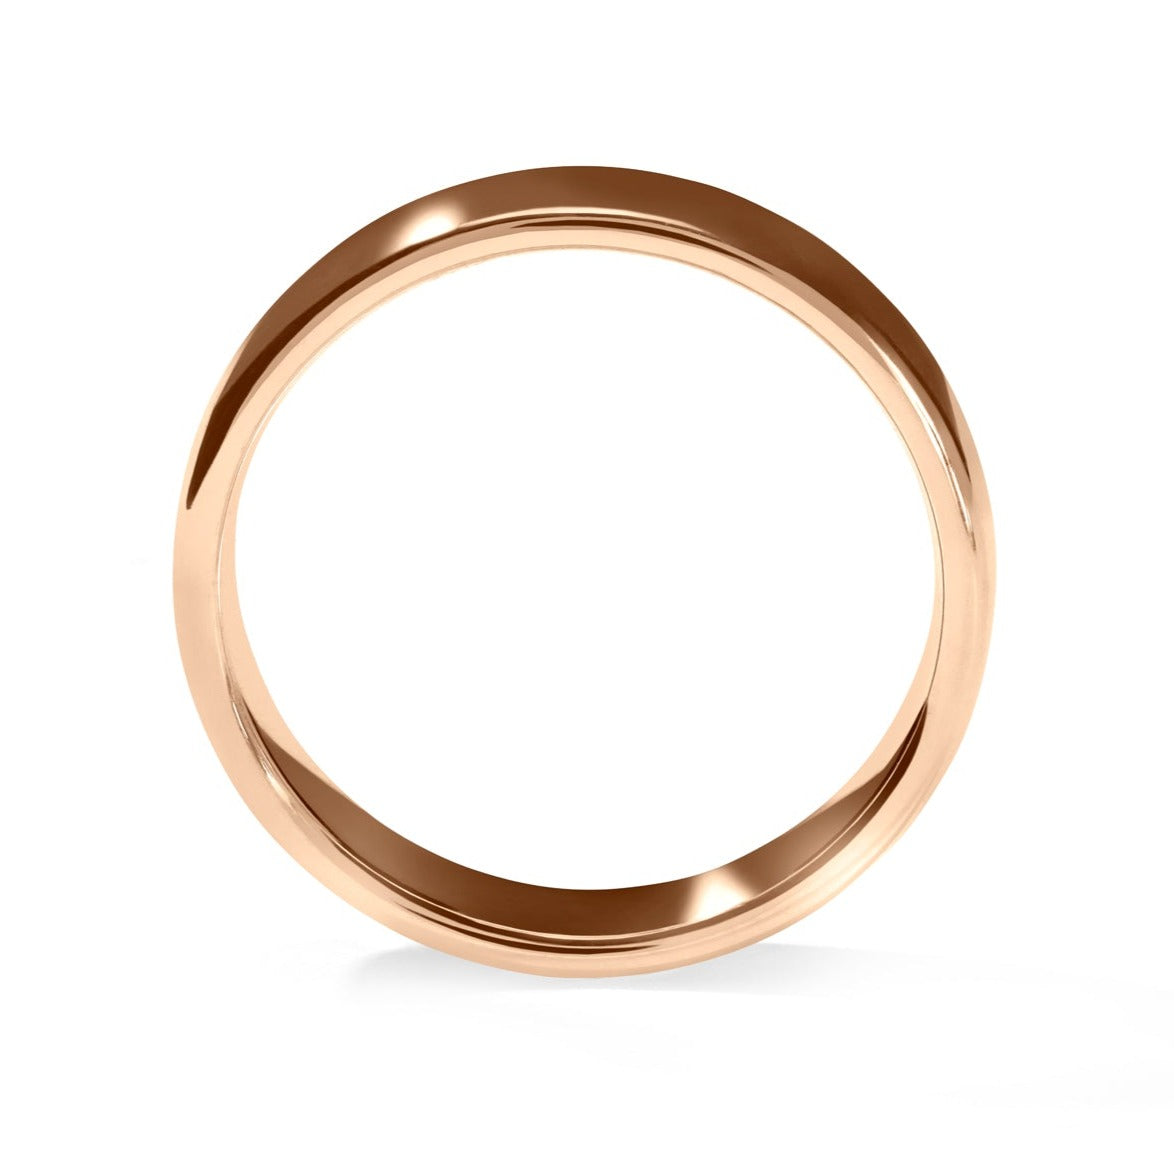 The Pure 1.5mm yellow gold